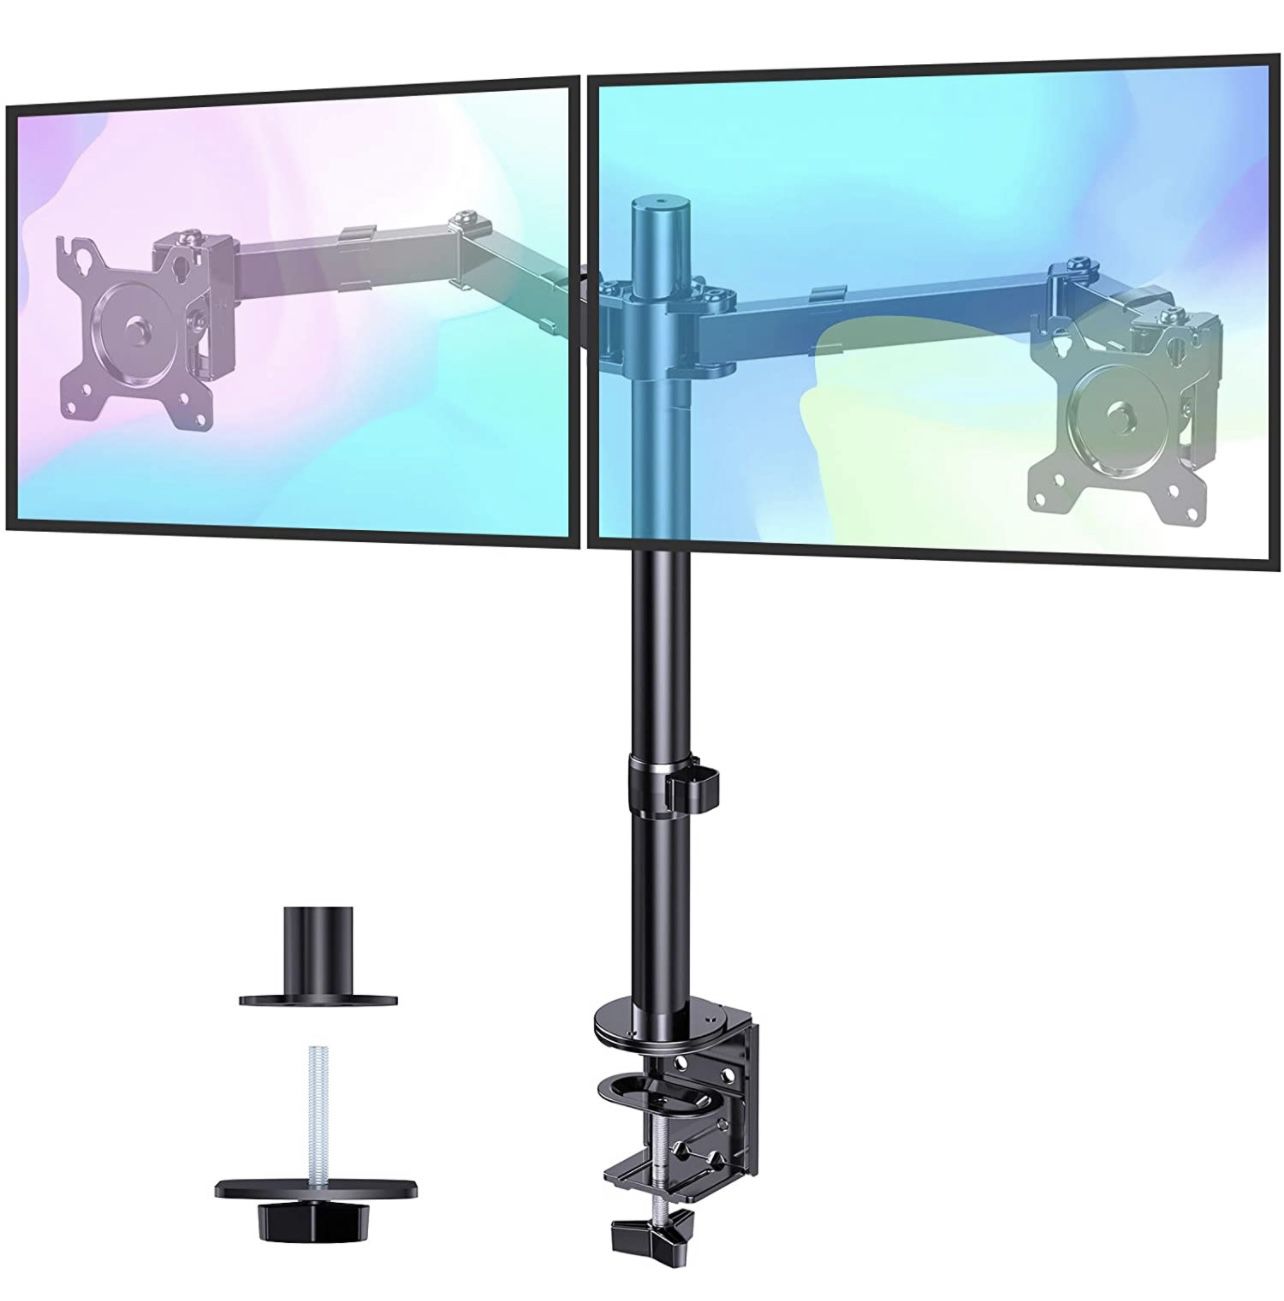 Dual Monitor Stand Desk Mount - Heavy Duty Fully Height Adjust LCD Monitor Mount with 2 Mounting Methods Fits Screens Up to 32" -Holds Up to 26.4 lbs 